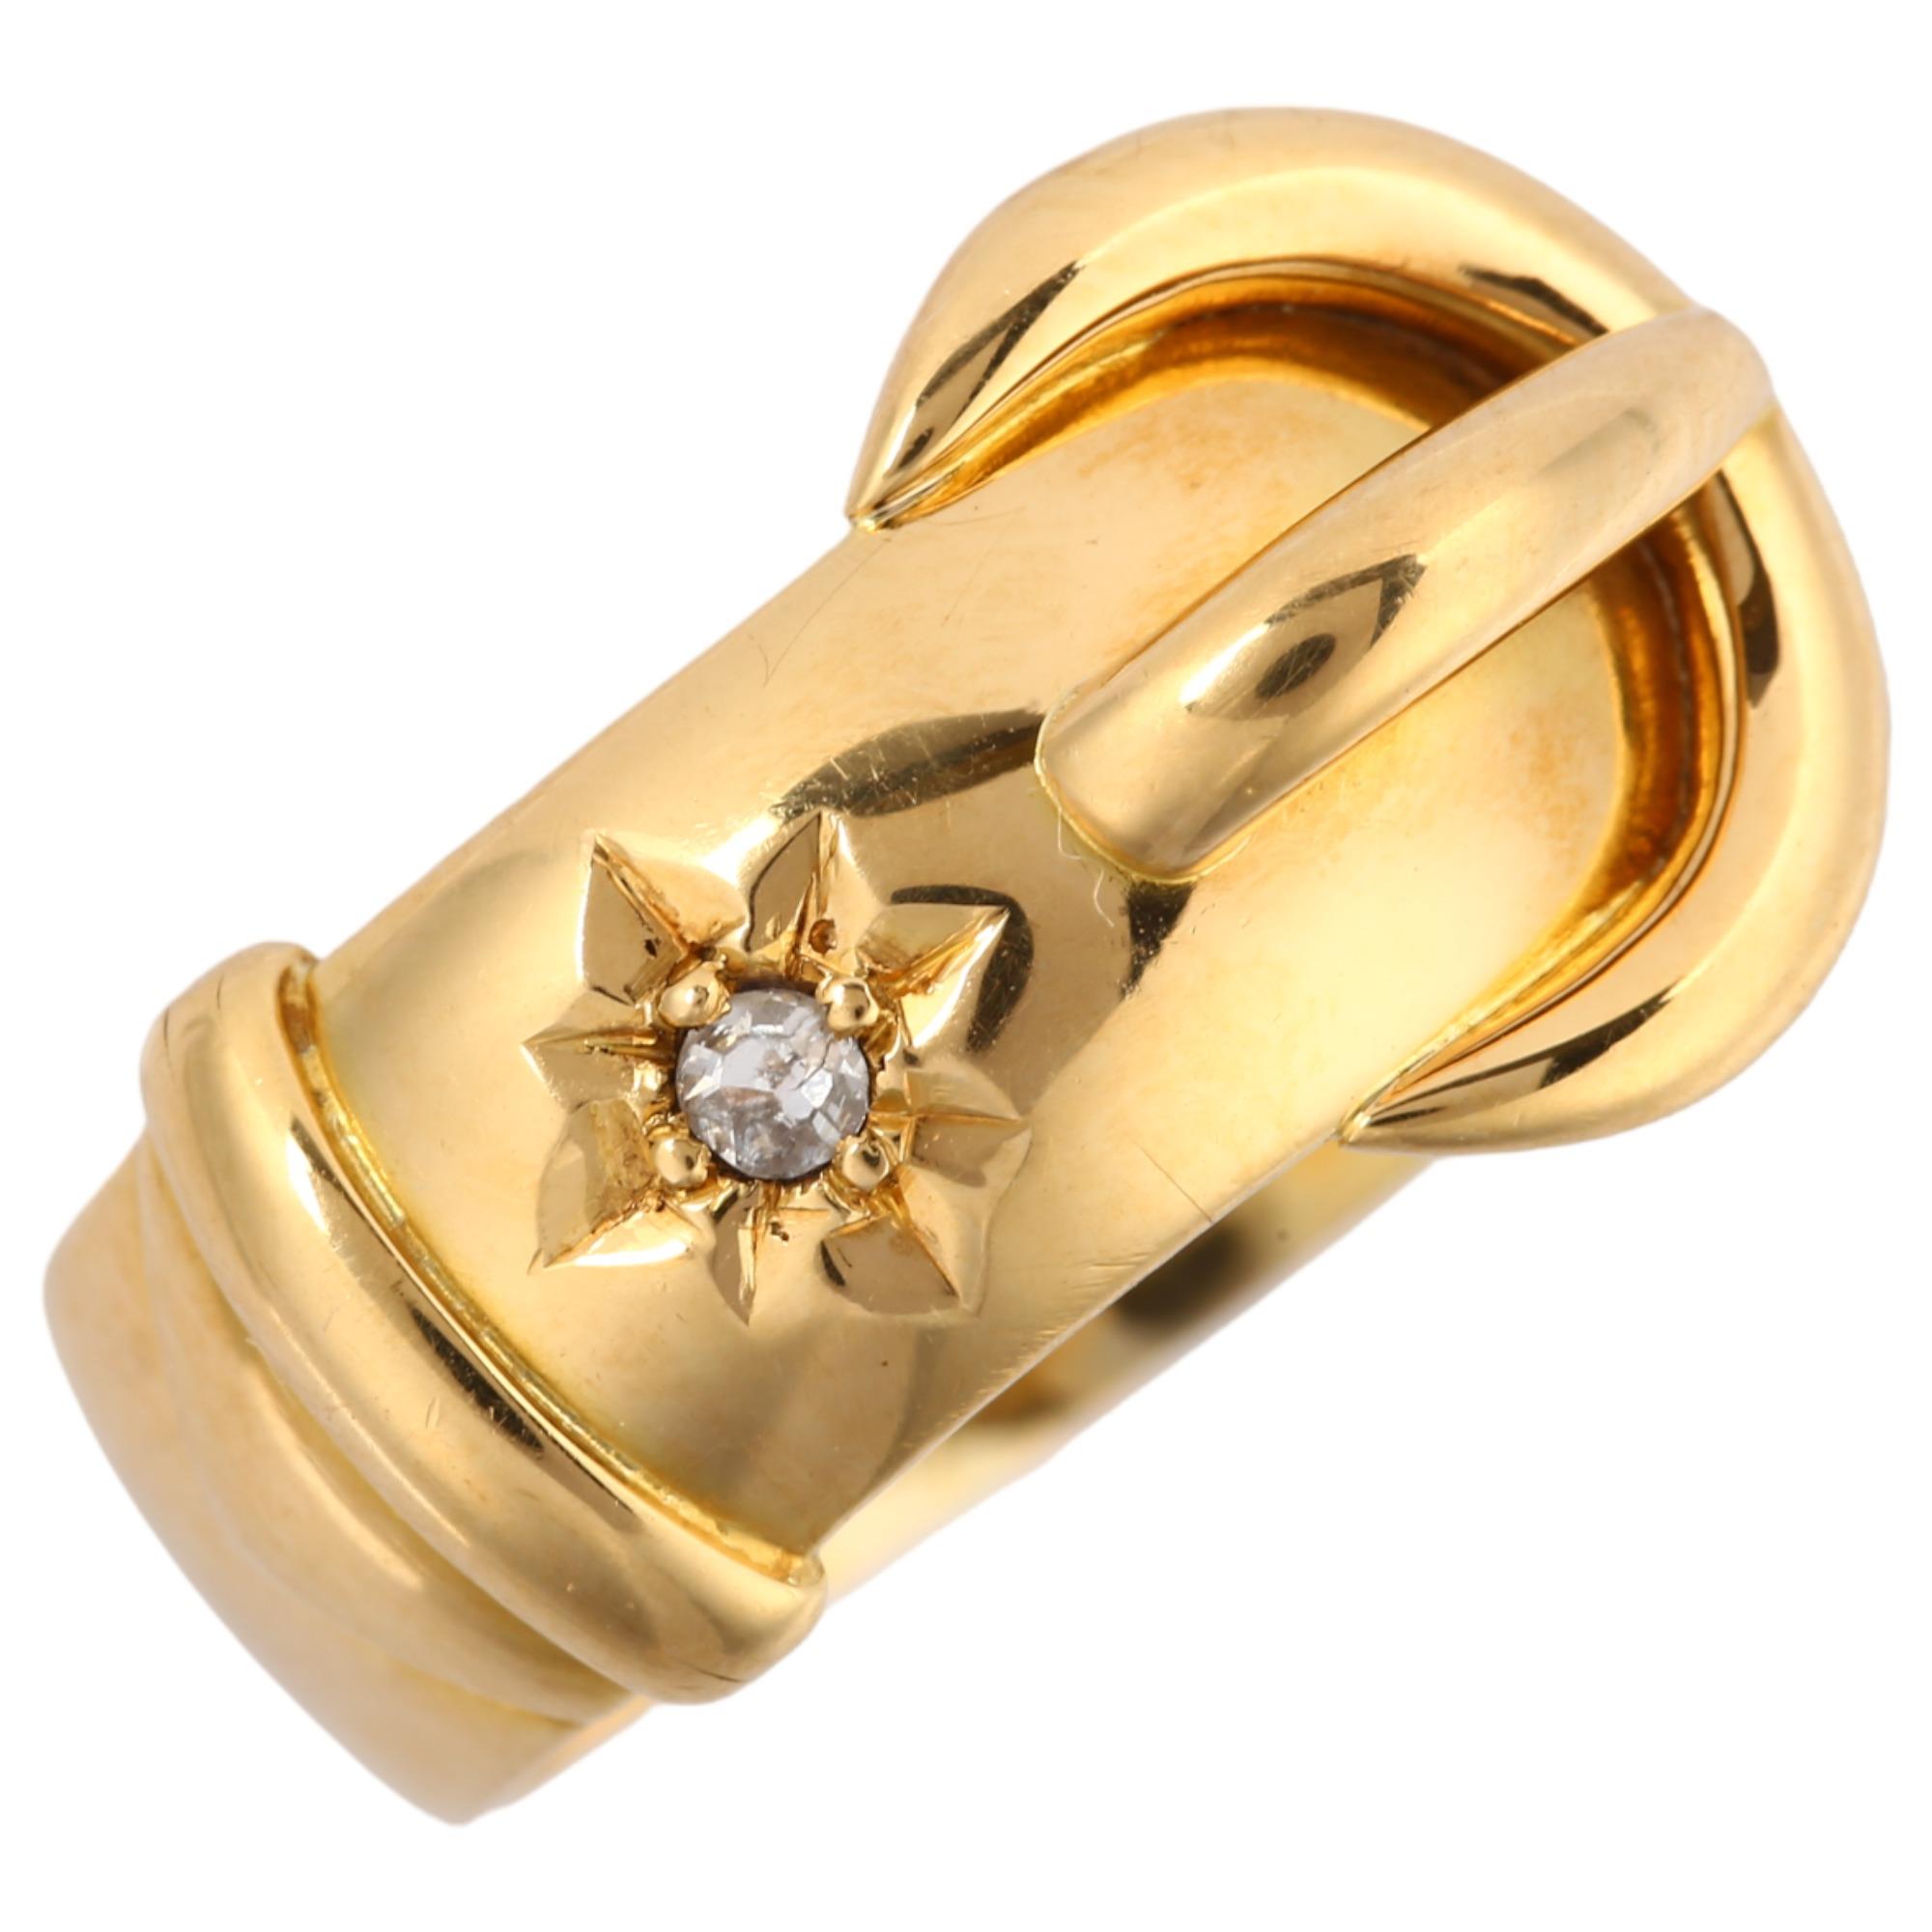 An early 20th century 18ct gold solitaire diamond belt buckle band ring, set with 0.02ct old-cut